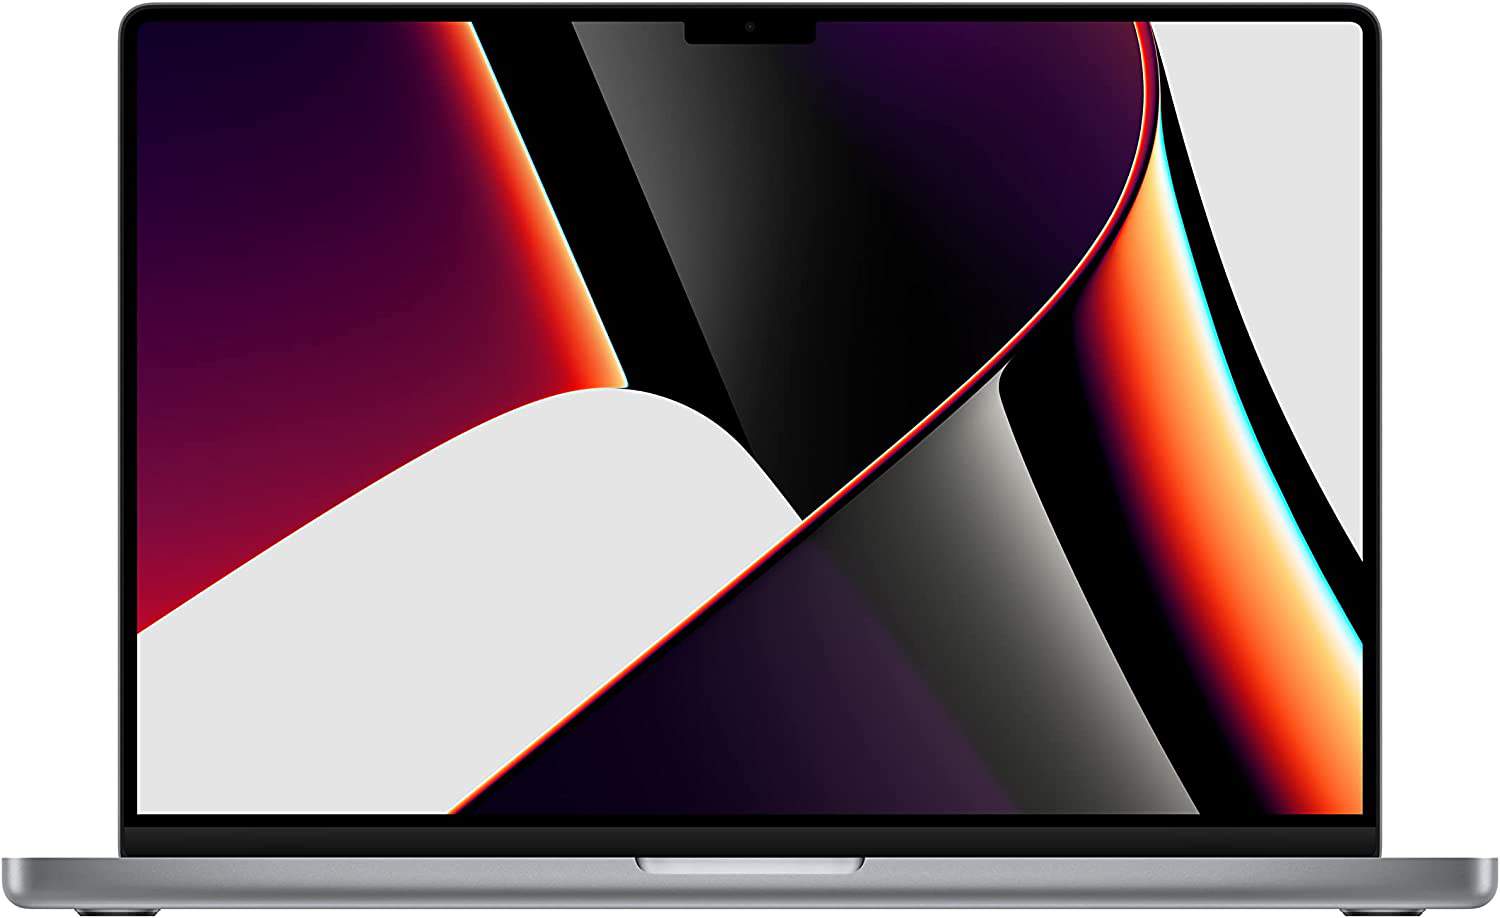 <span style="background-color: transparent;">MacBook Pro 16-inch </span>